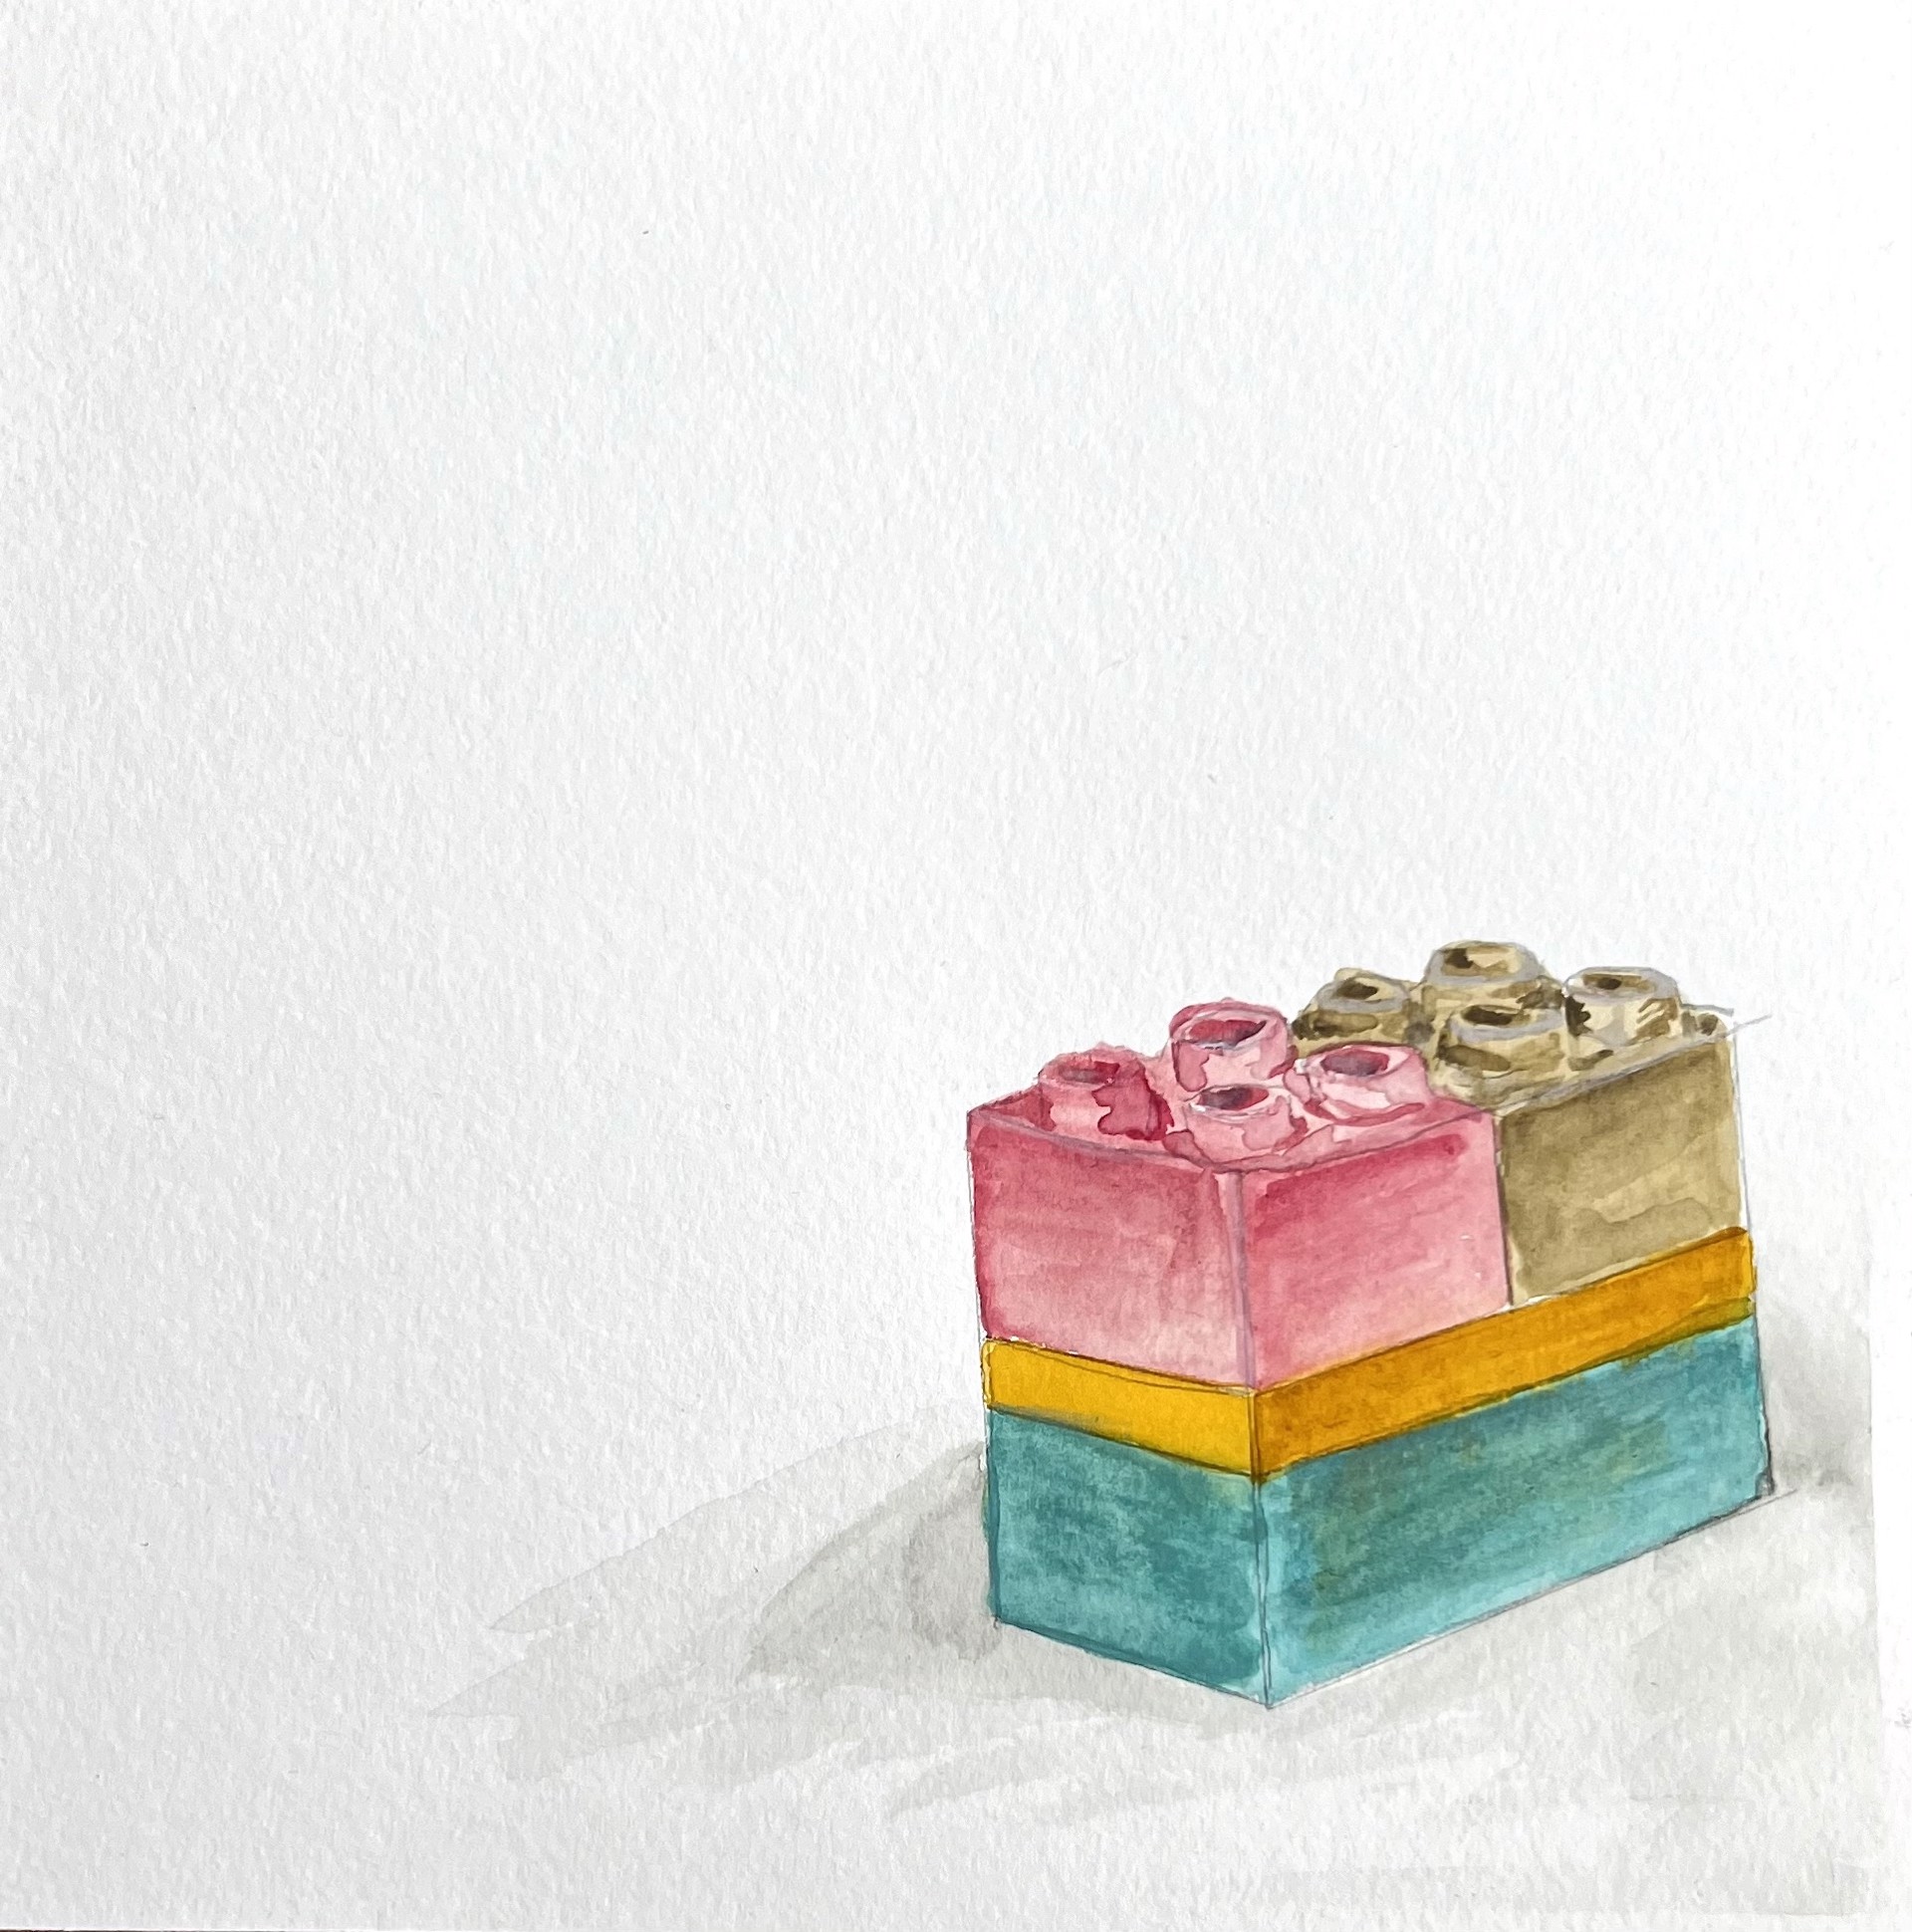 LEGO Study #14 by Kate Fisher